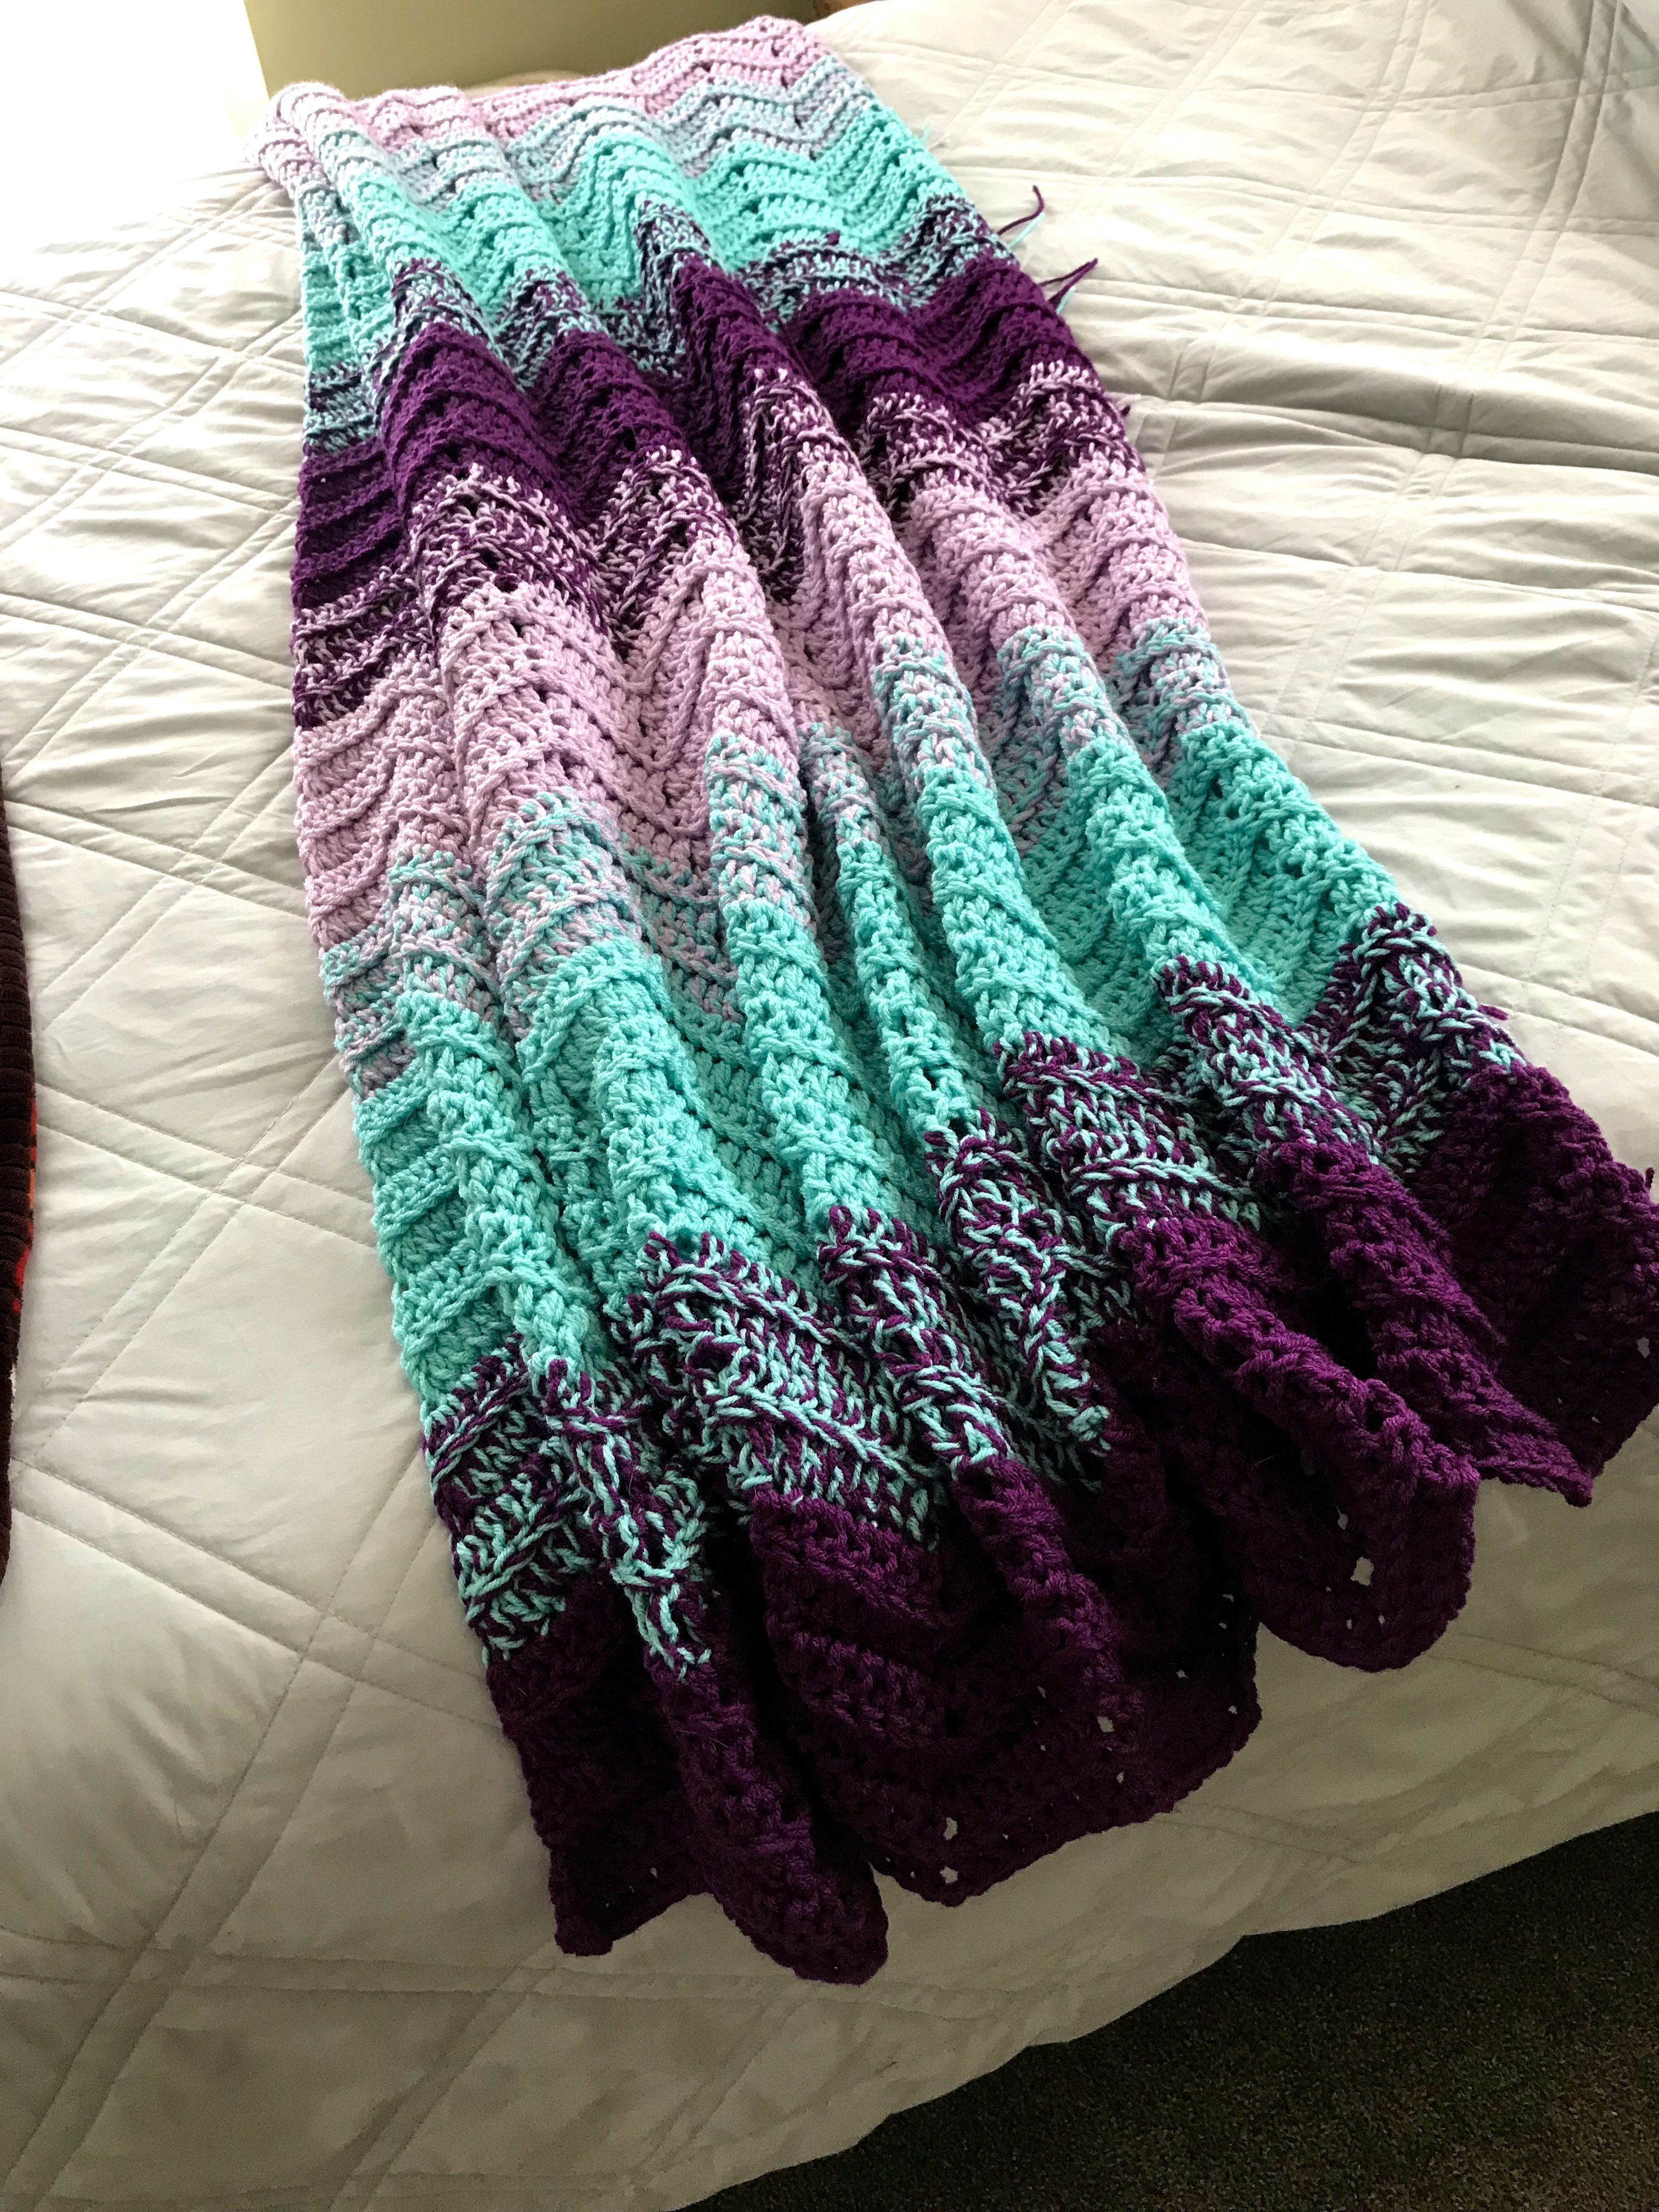 Double Crochet Chevron Pattern Finished Blanket I Made For A Friends Birthday Double Crochet